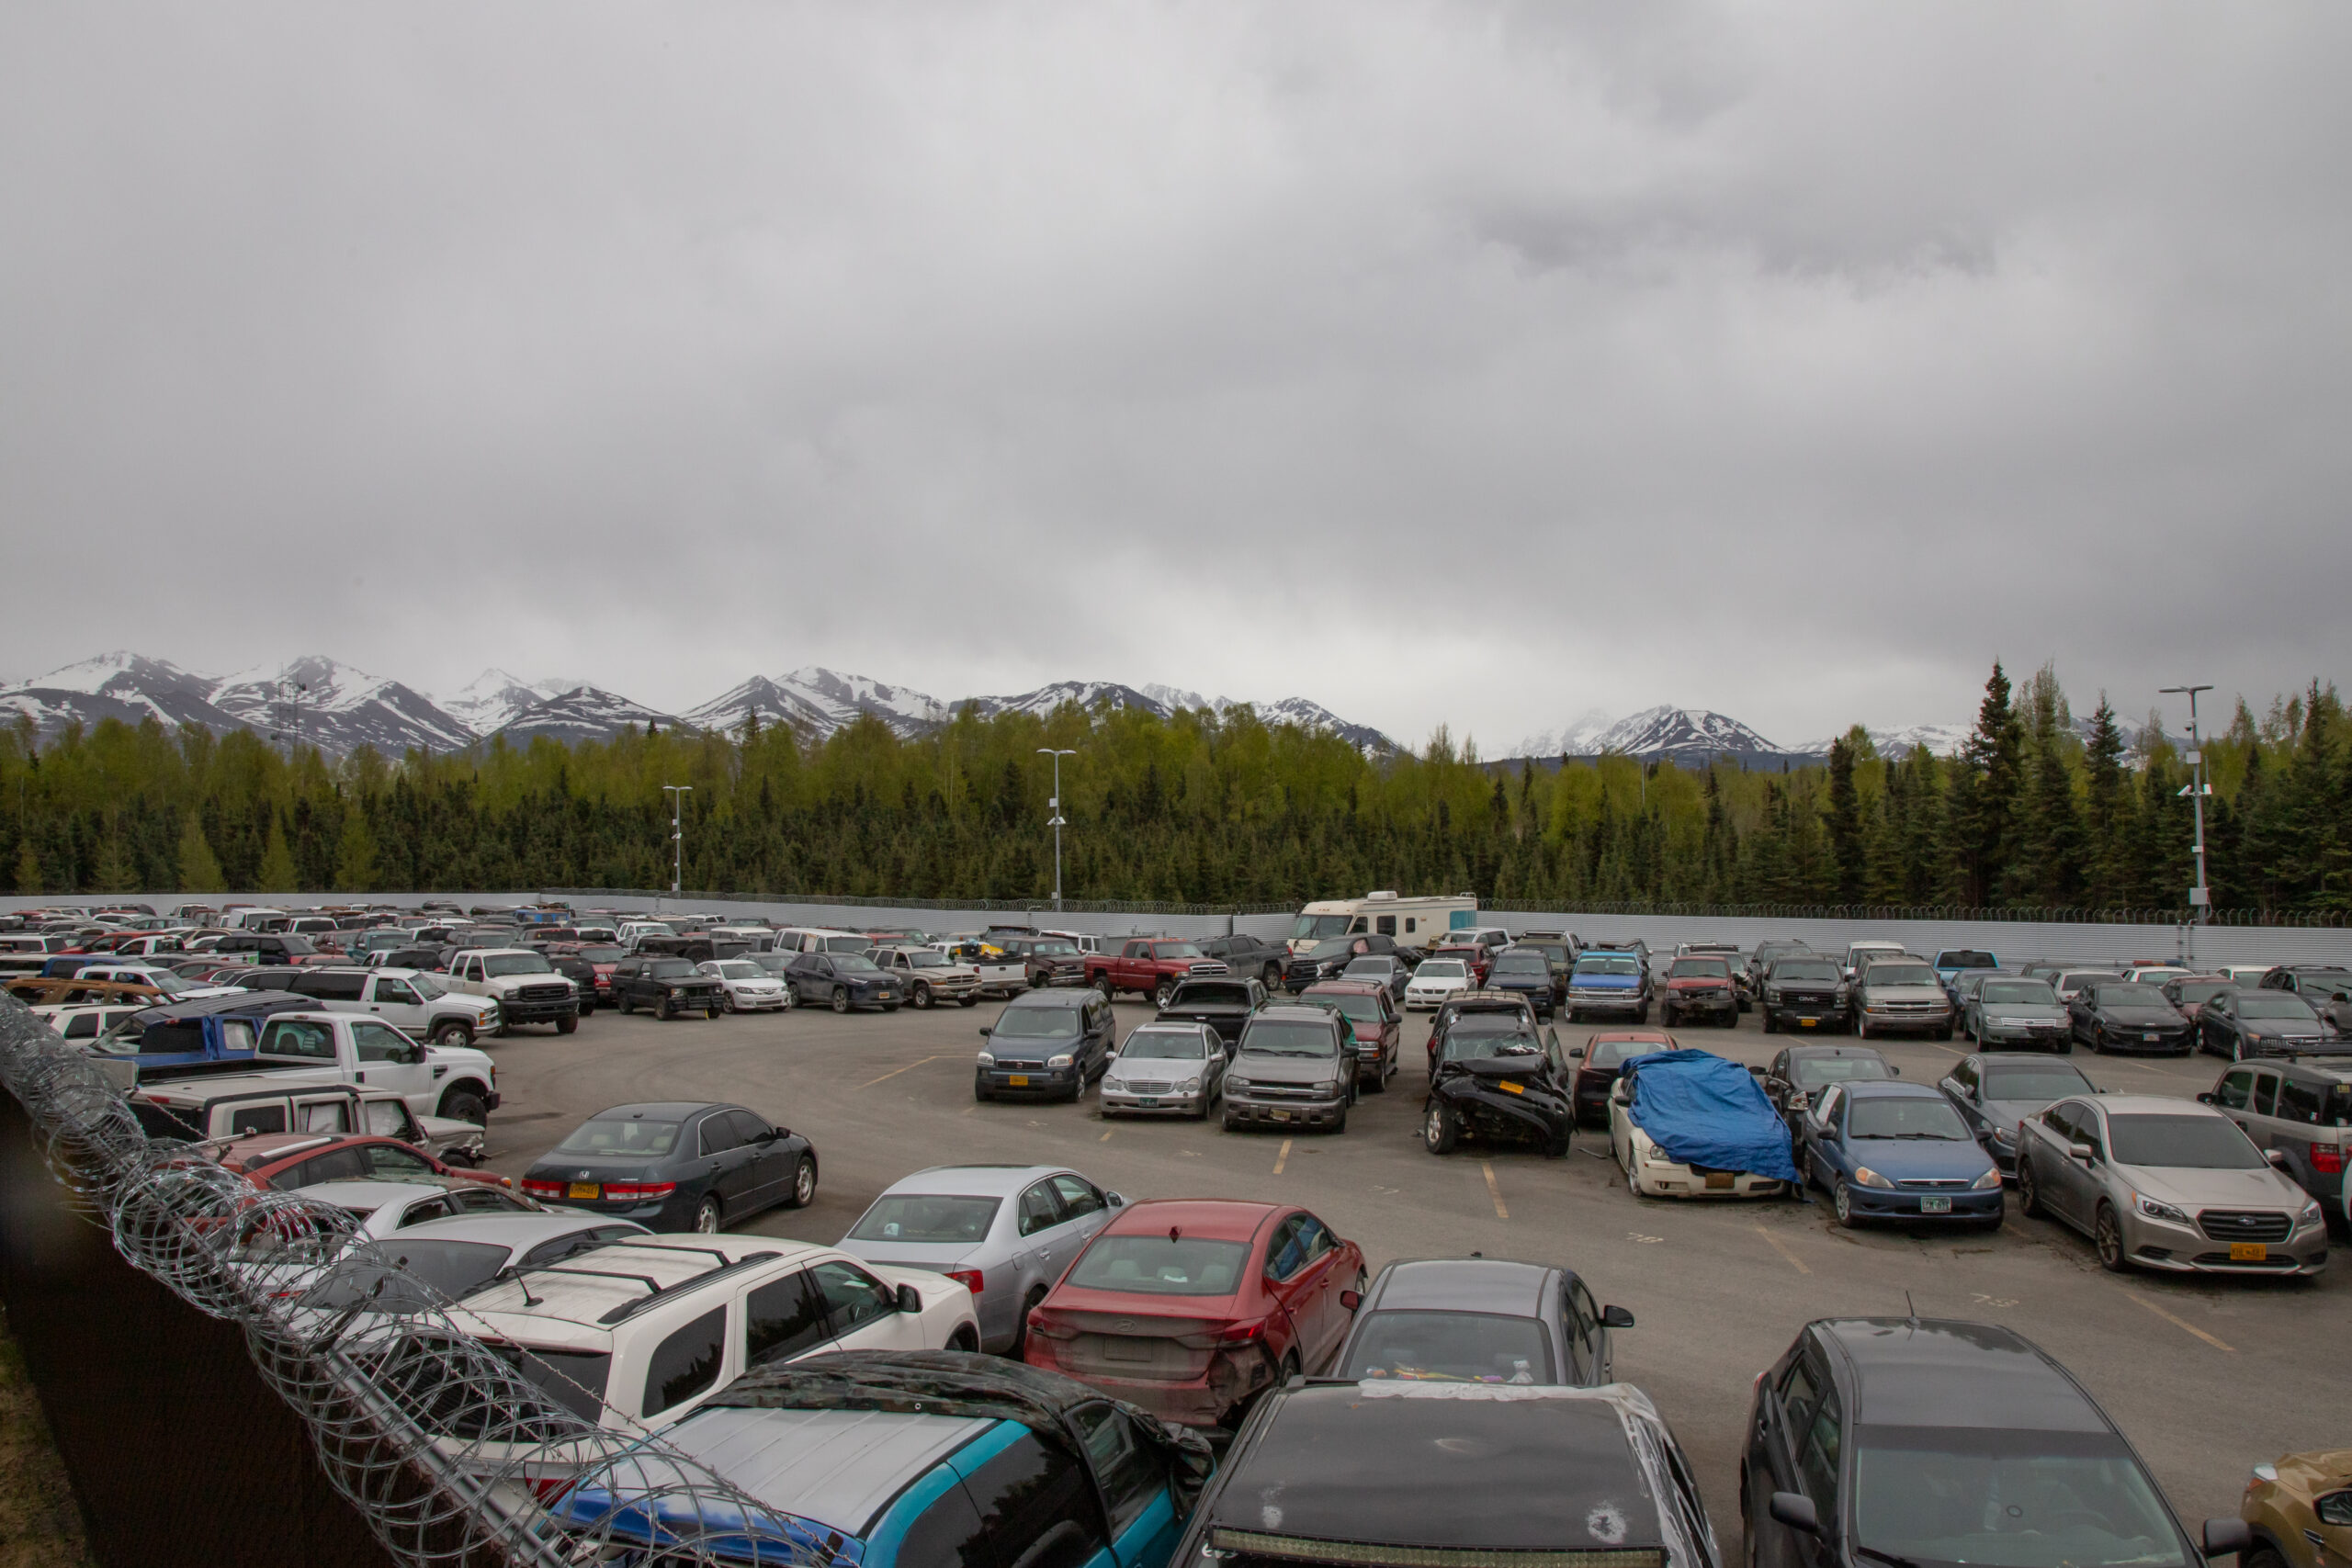 A parking lot with cars. Trees and mountains in the background.